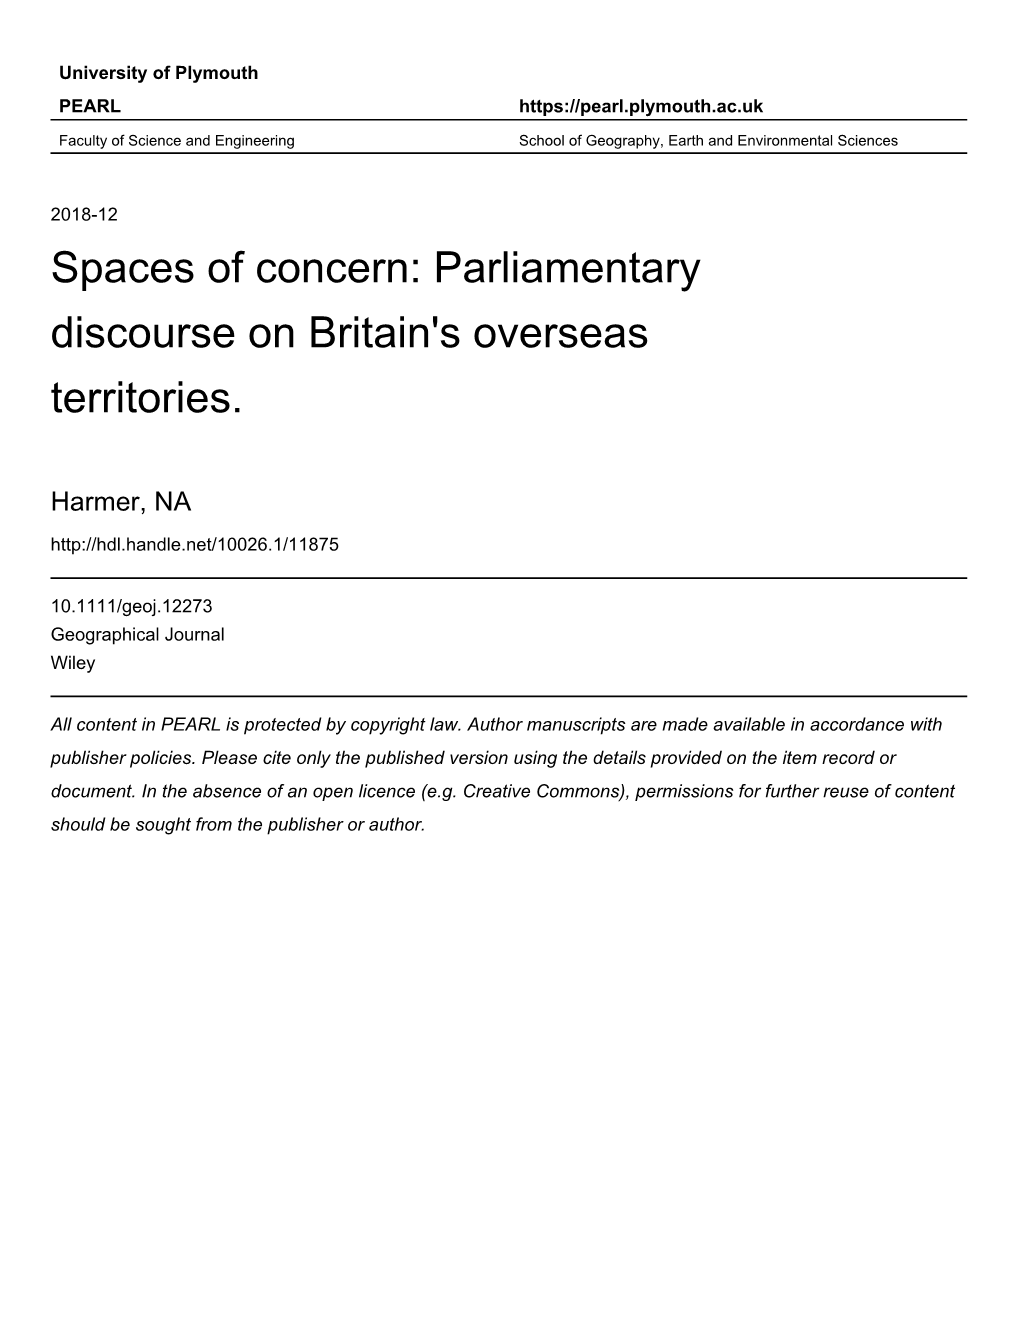 Spaces of Concern: Parliamentary Discourse on Britain's Overseas Territories